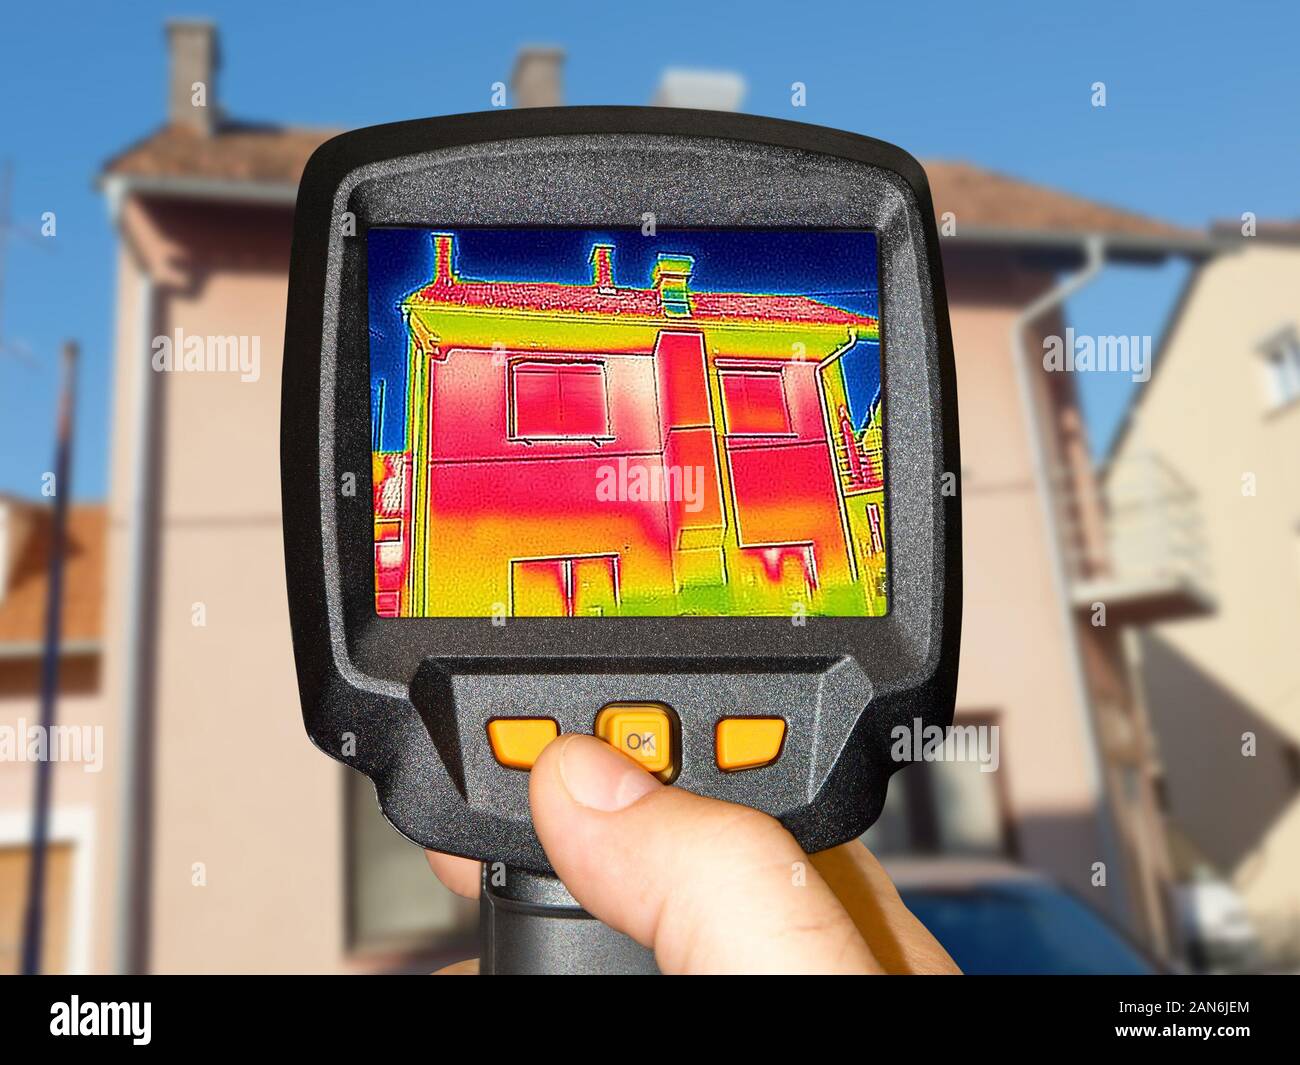 Recording Heat Loss at the family House with a thermal camera Stock Photo